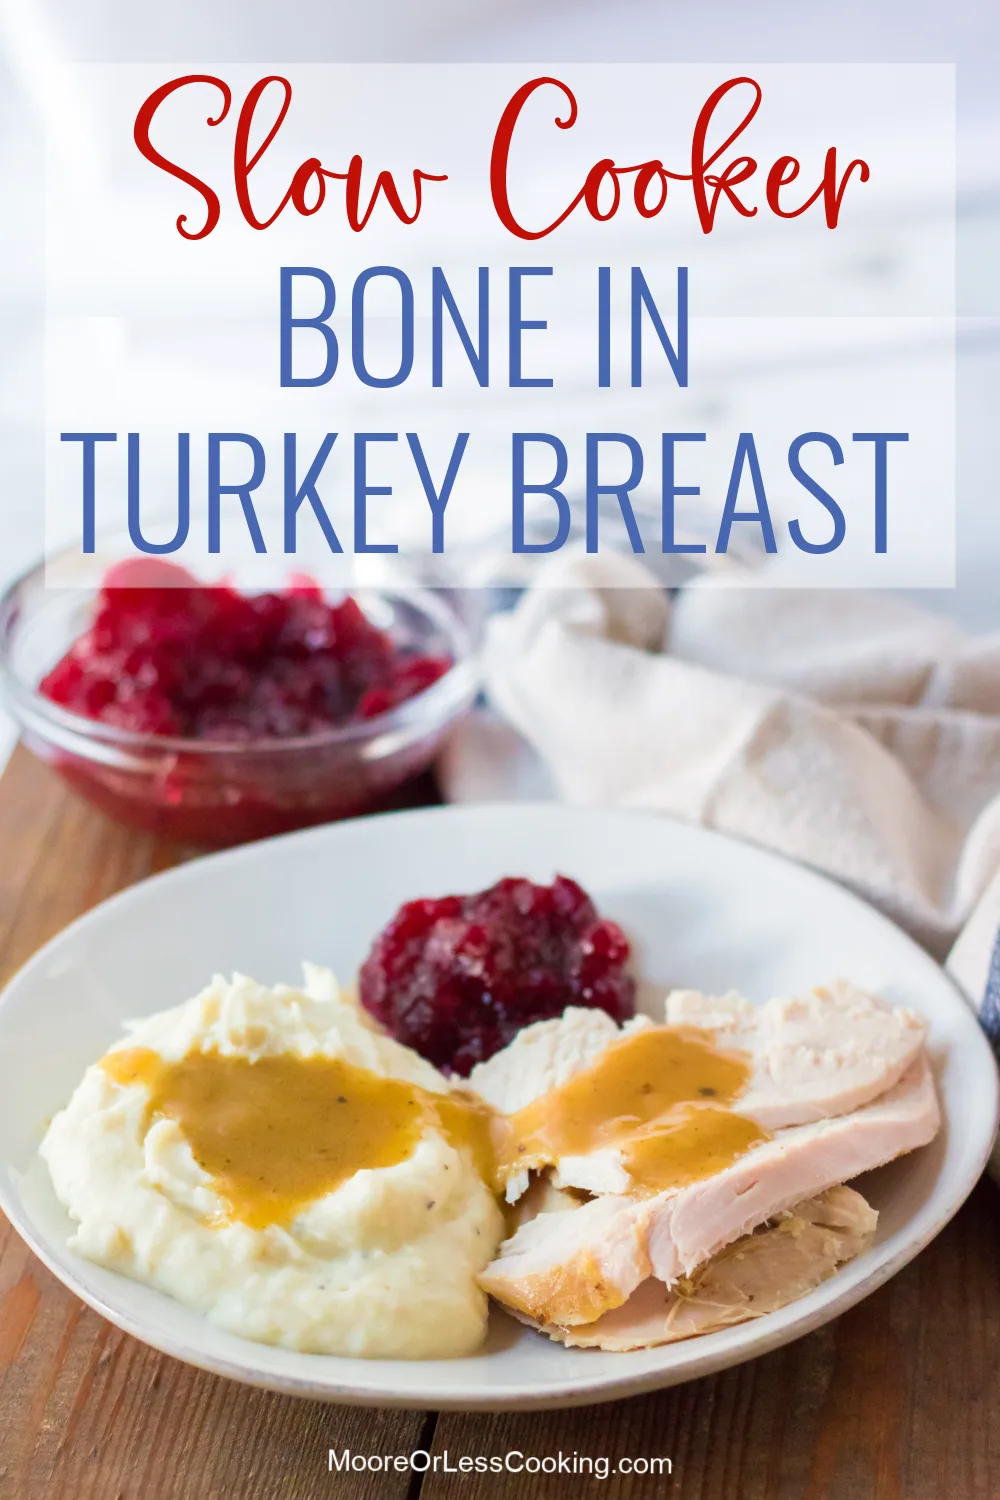 Perfect for Thanksgiving and beyond, this Slow Cooker Bone-In Turkey Breast recipe will become your new favorite way to roast your holiday dinner entrée. It's an easy and hands-off way to cook a smaller turkey to juiciness that's infused with outrageous flavor. via @Mooreorlesscook